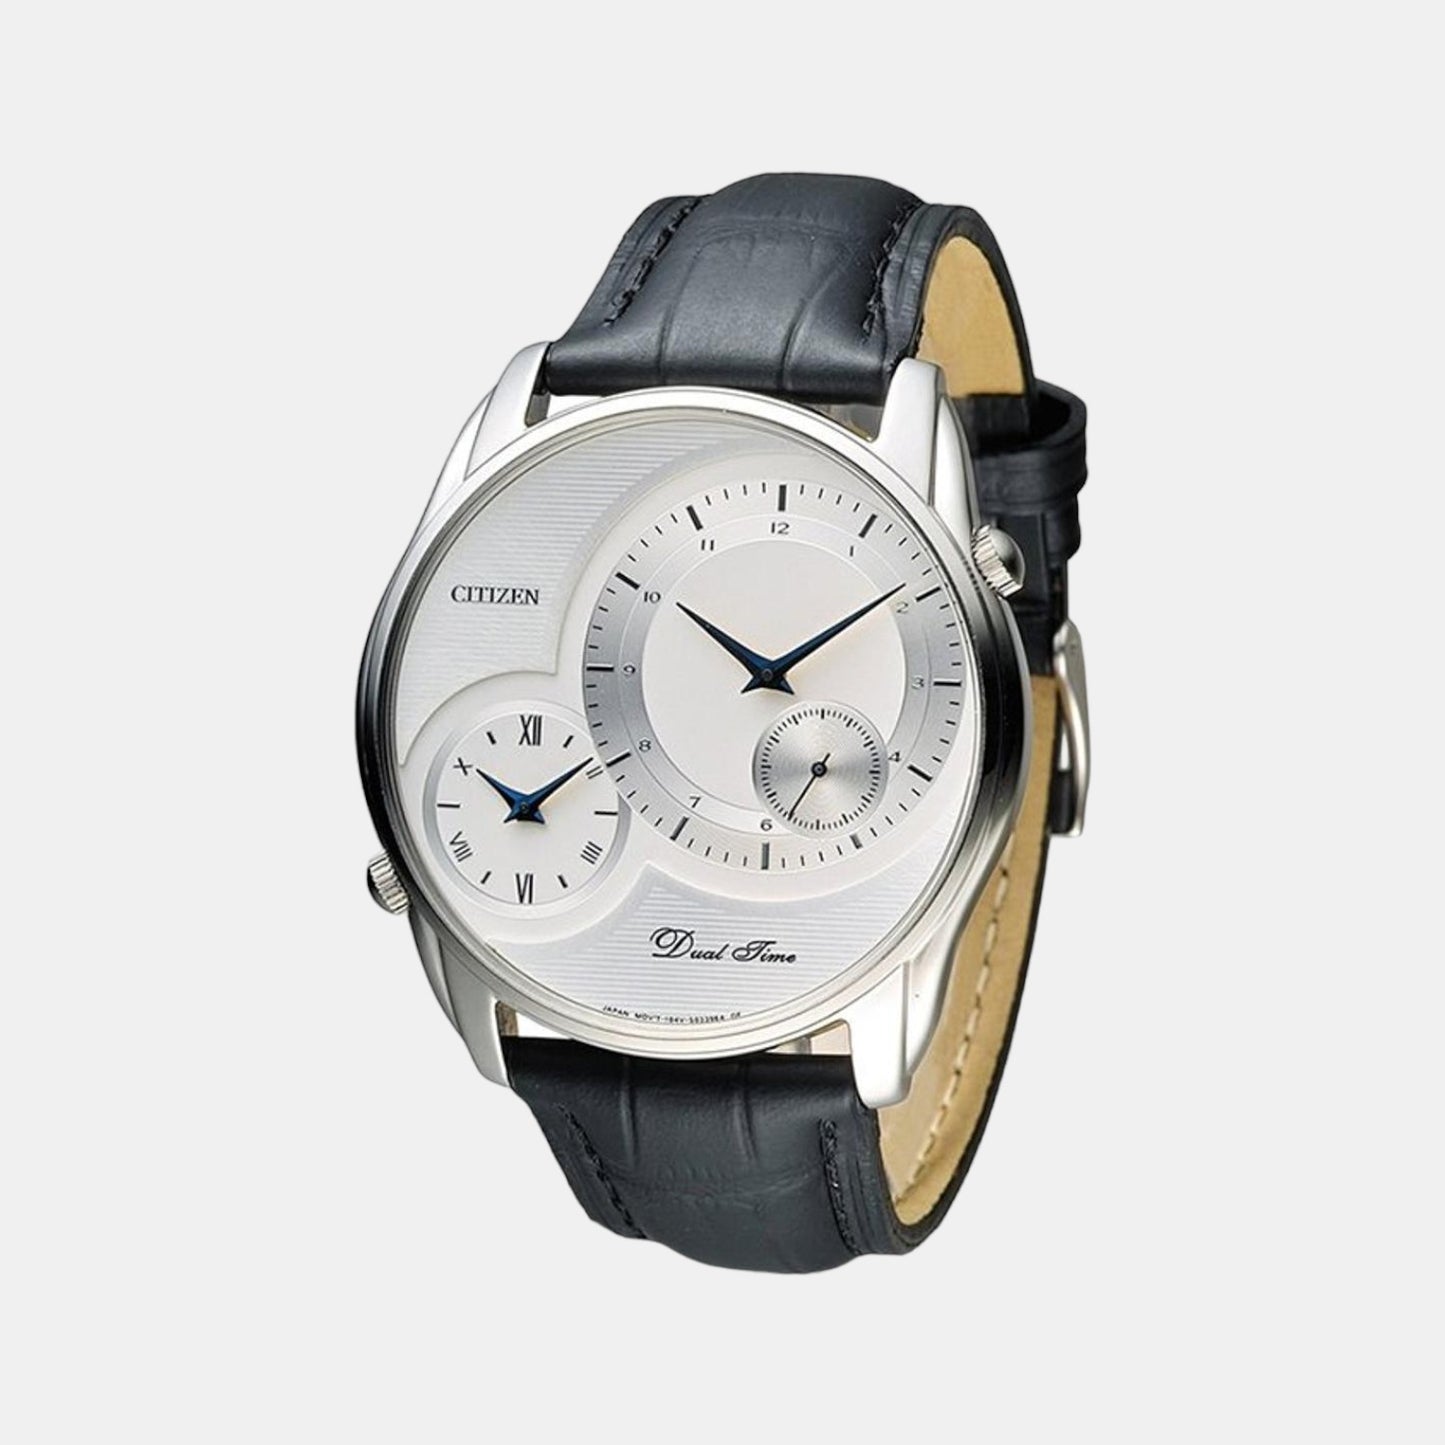 Male Silver Analog Leather Watch AO3009-04A